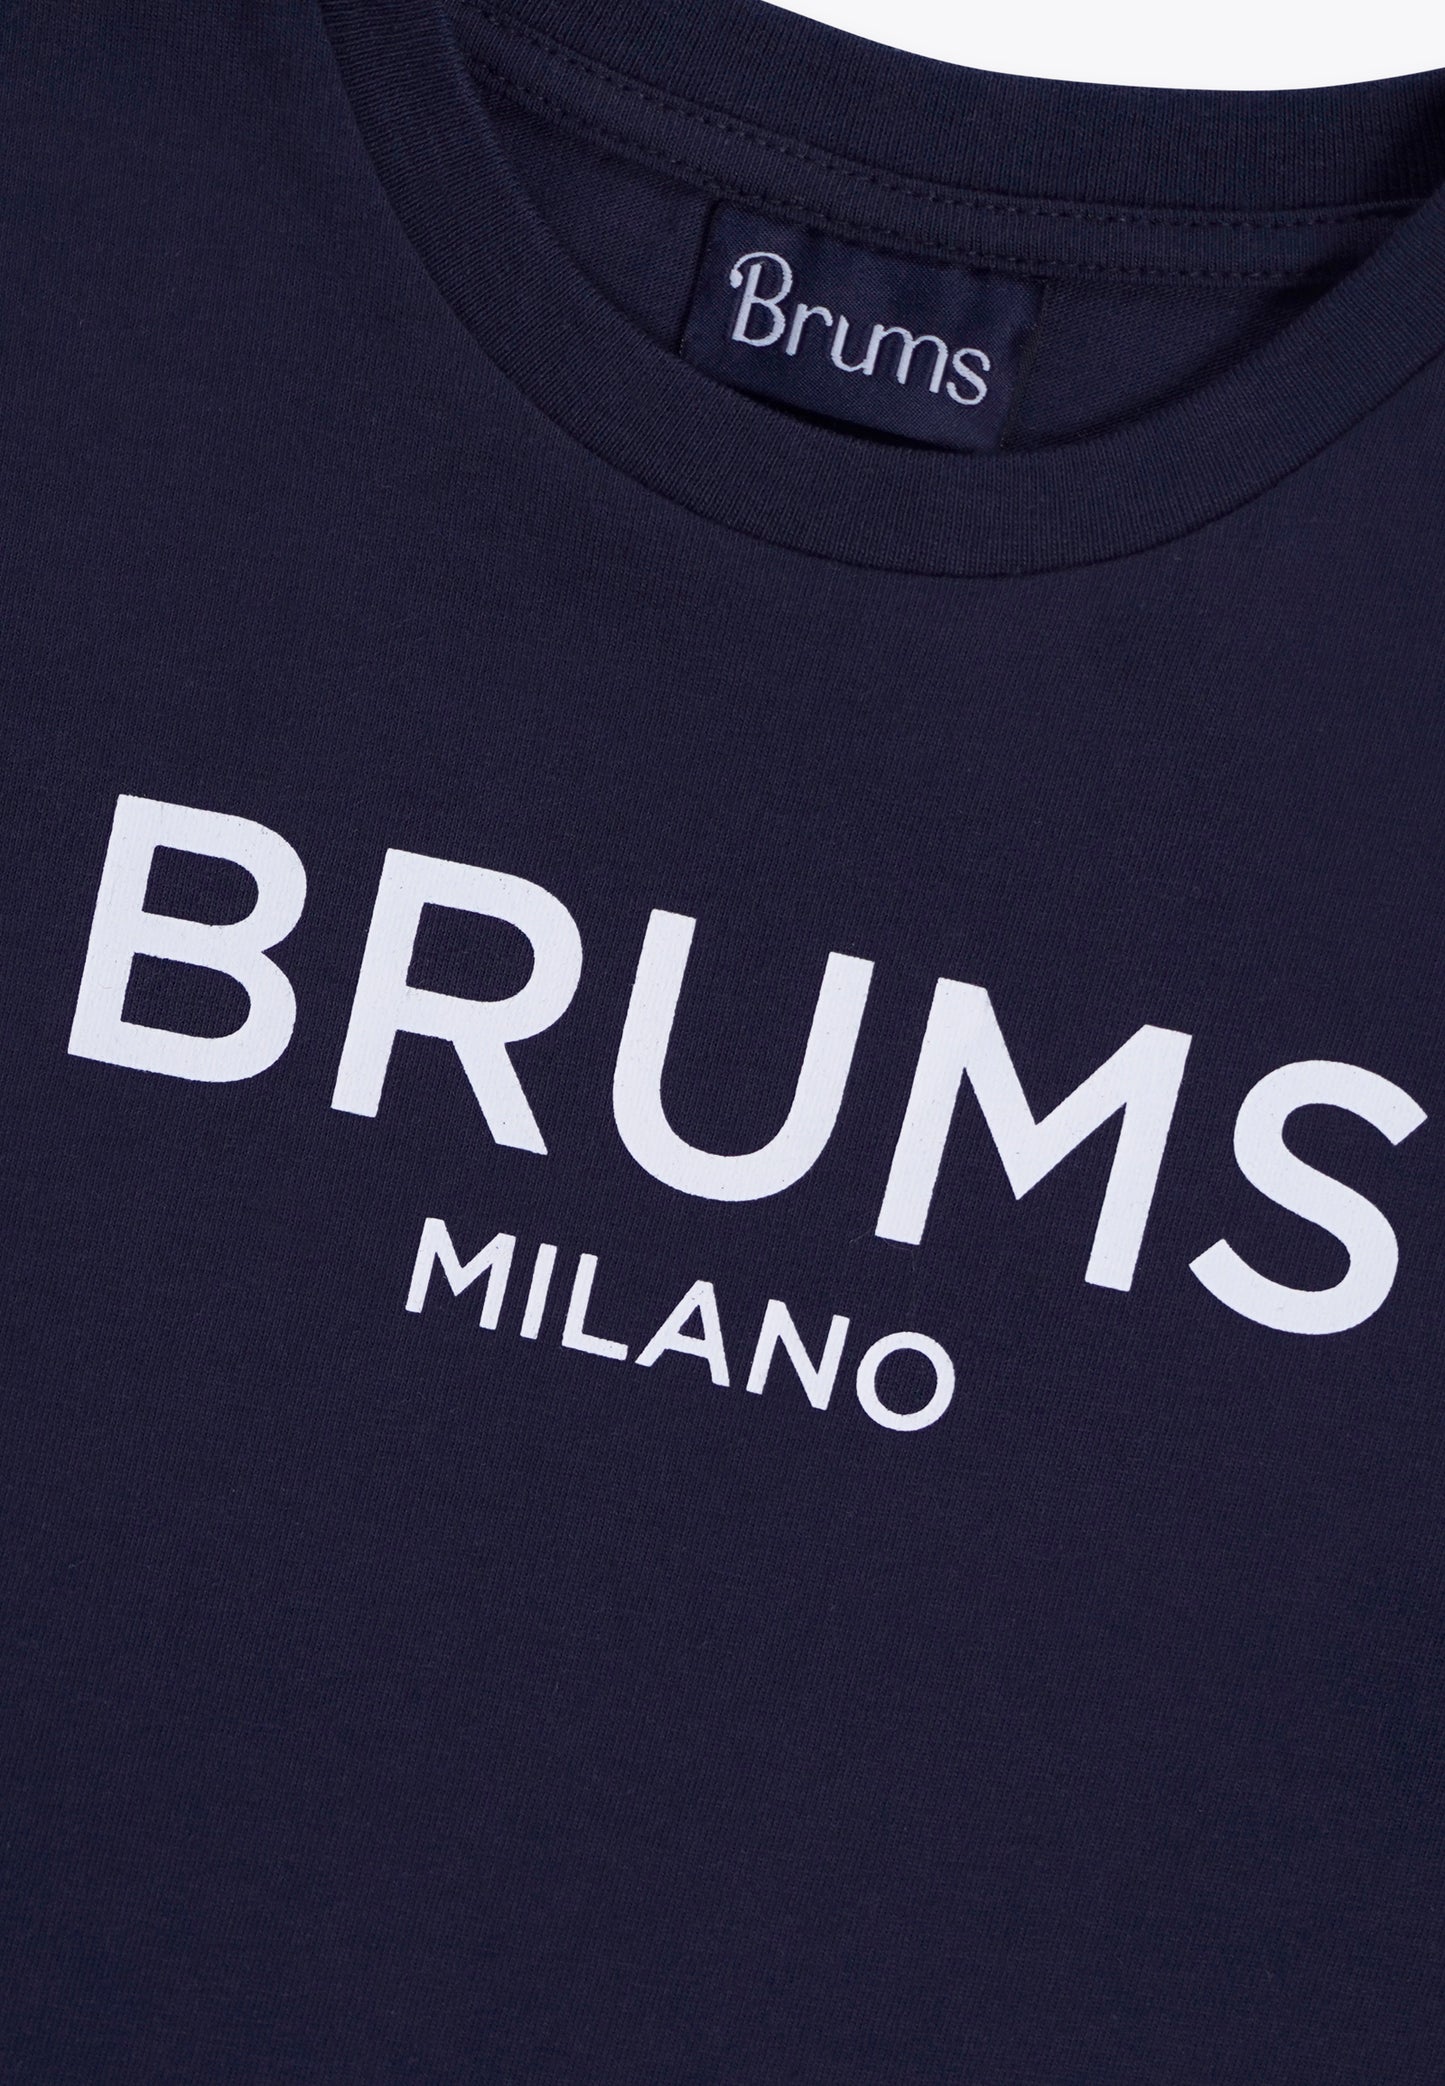 Short Sleeve T-Shirt in Organic Cotton Jersey with Brums Print